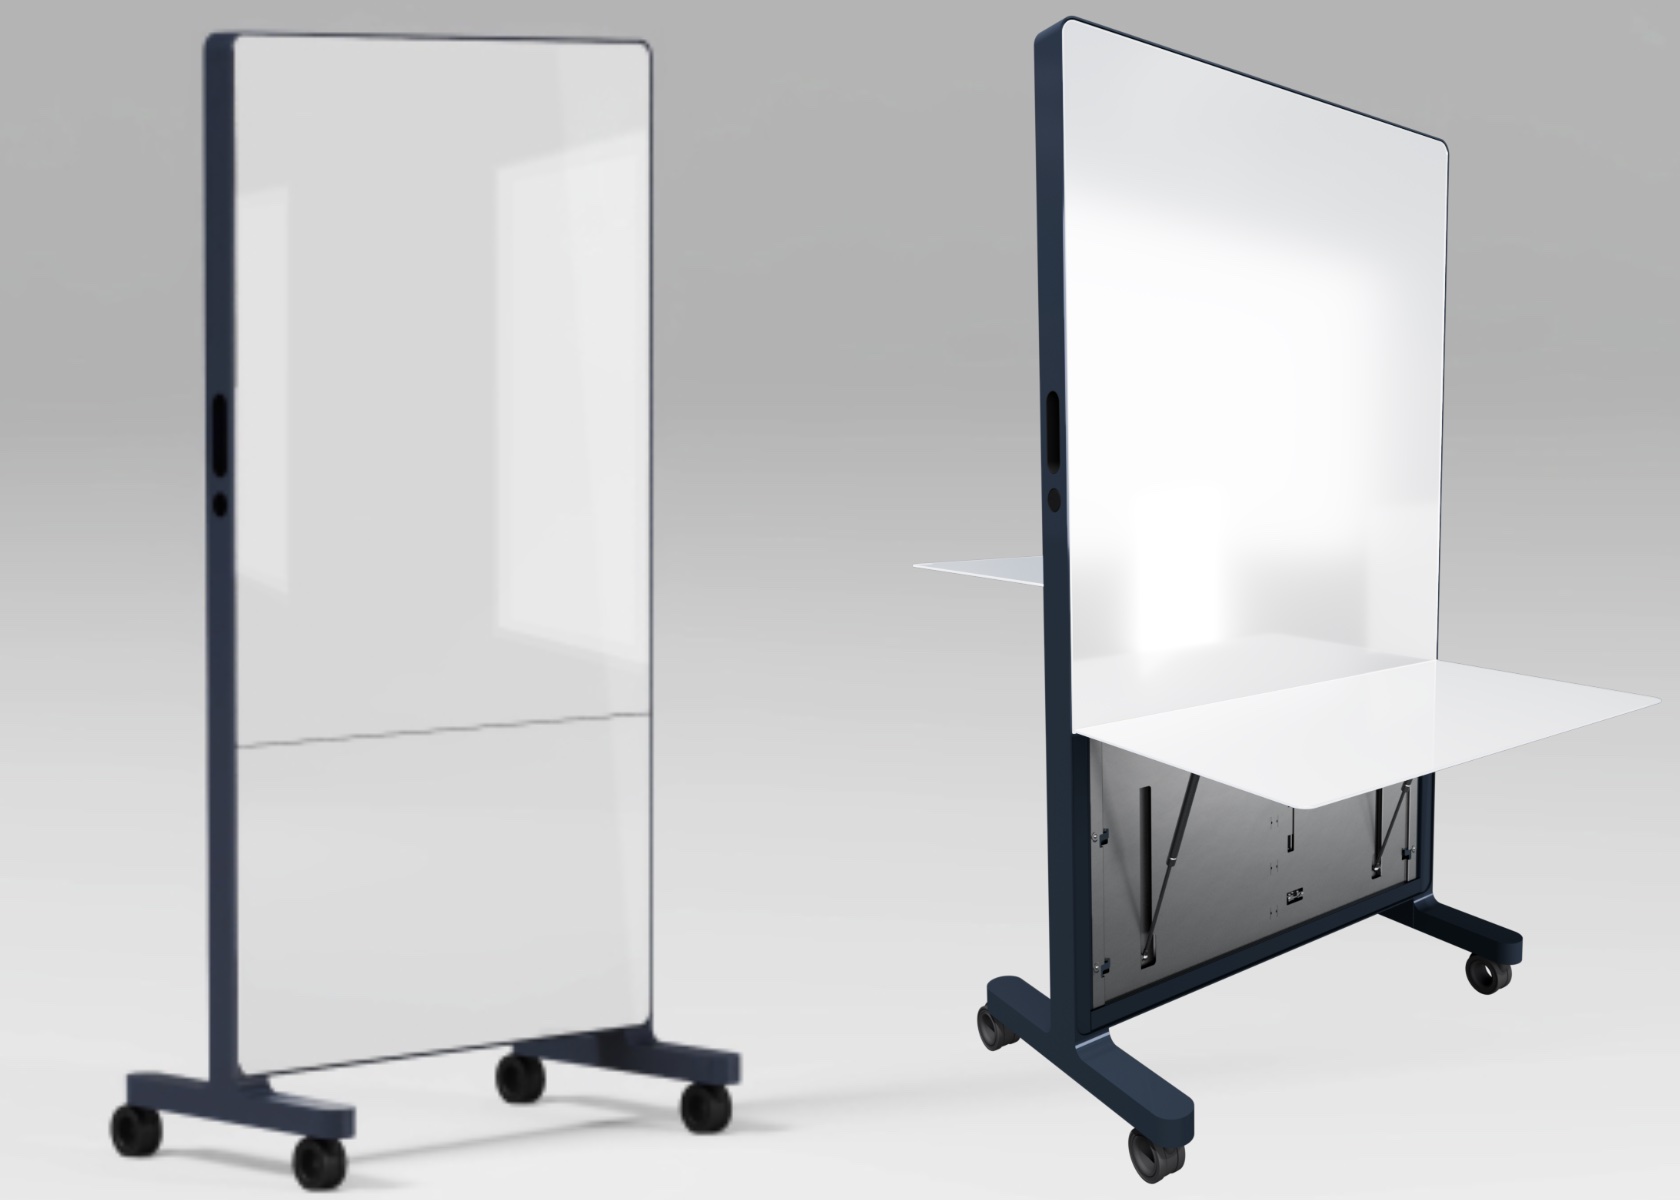 #Clarus Atmus Mobile Desk Transforms Design Studios with Multifunctional Whiteboard and Projection Capabilities